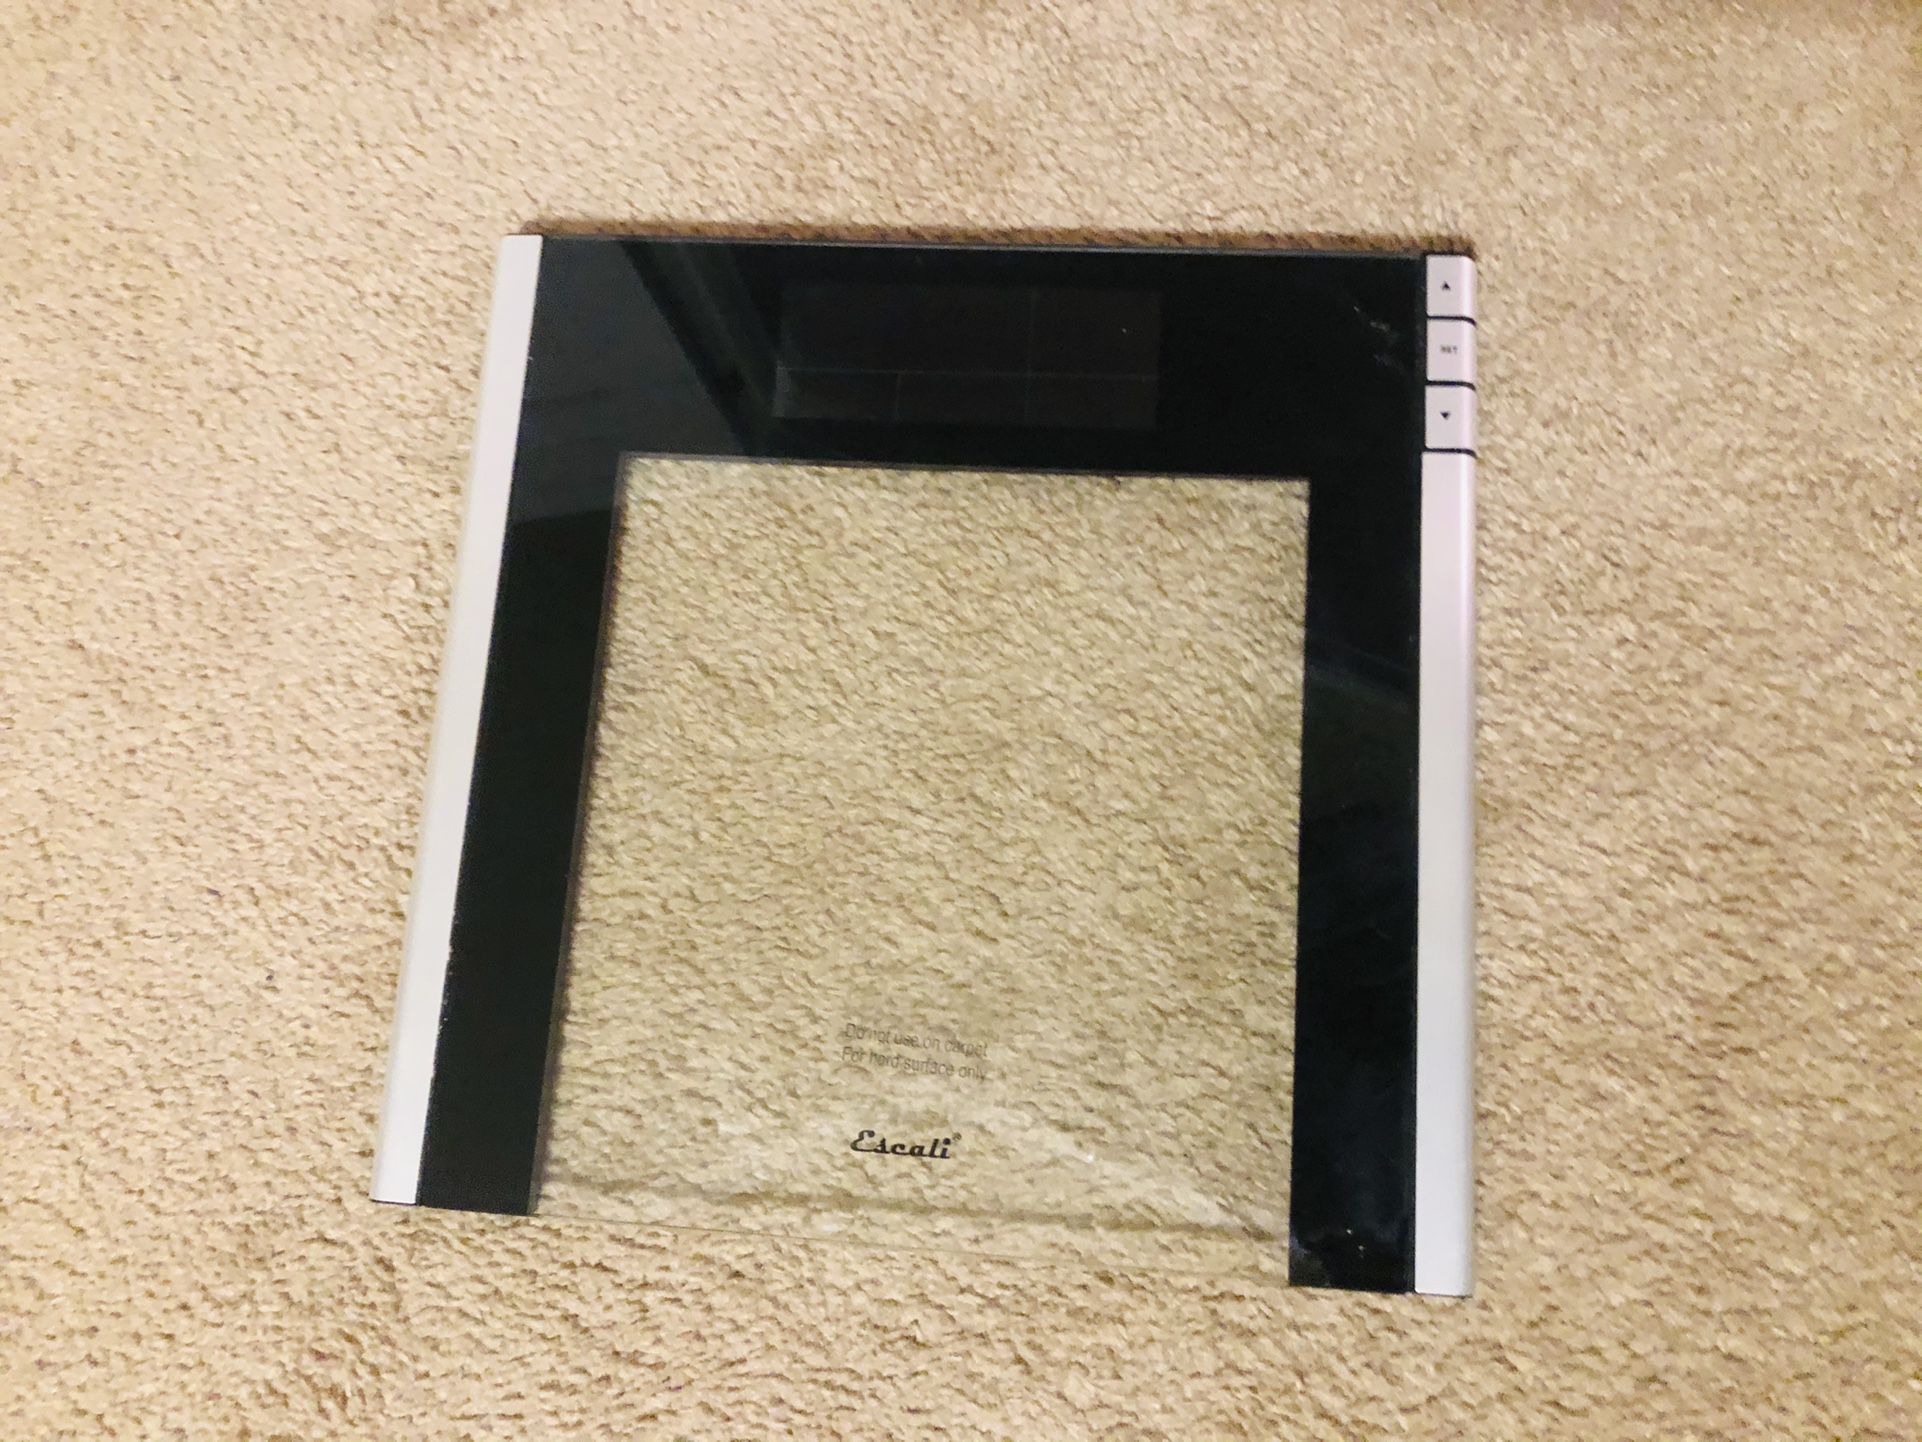 Beautiful Glass Scale! A Nice Addition To You Bathroom. Need Gone ASAP!